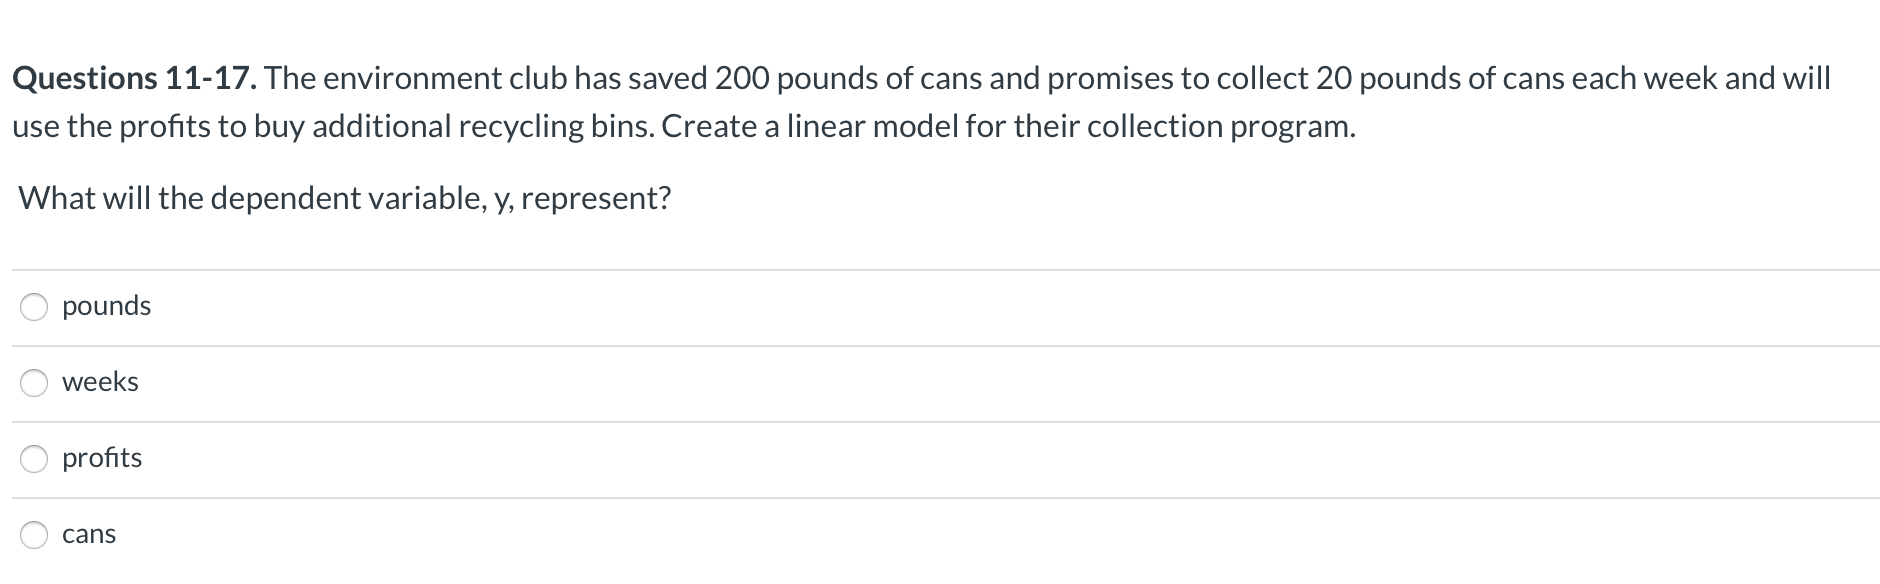 Questions 11-17. The environment club has saved 200 pounds of cans and promises to collect 20 pounds of cans each week and will
use the profits to buy additional recycling bins. Create a linear model for their collection program.
What will the dependent variable, y, represent?
pounds
weeks
profits
cans
